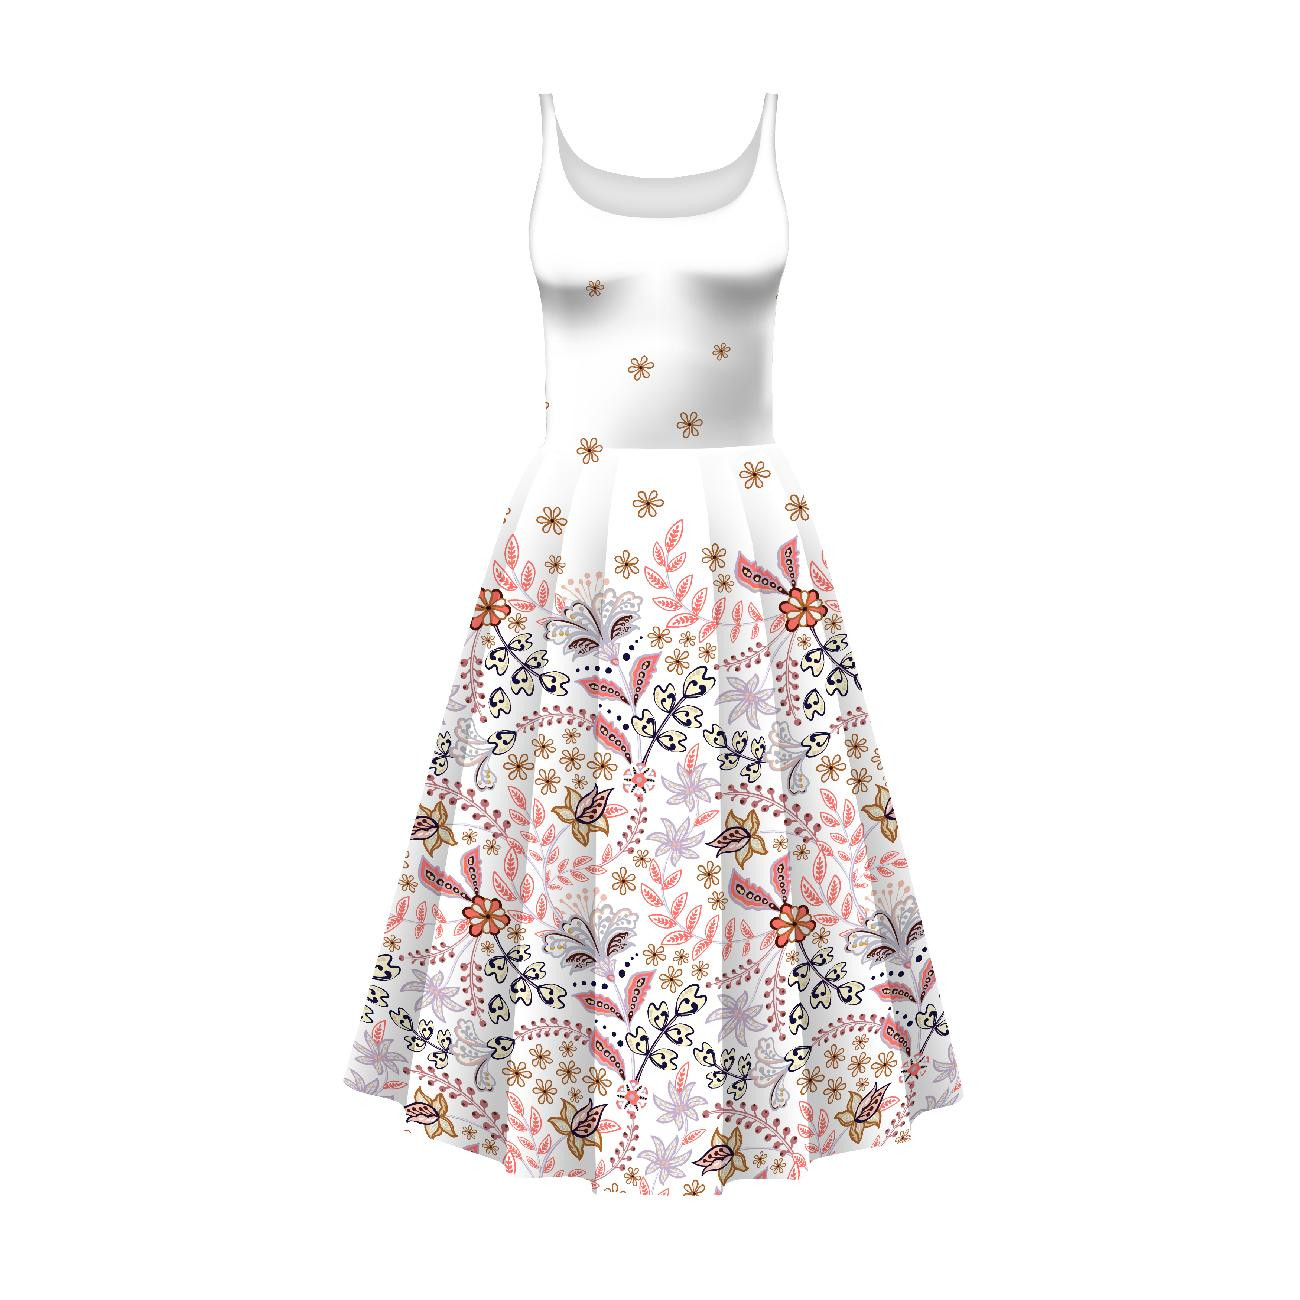 DRESS "ISABELLE" - FLOWERS (pattern no. 3) / white - sewing set